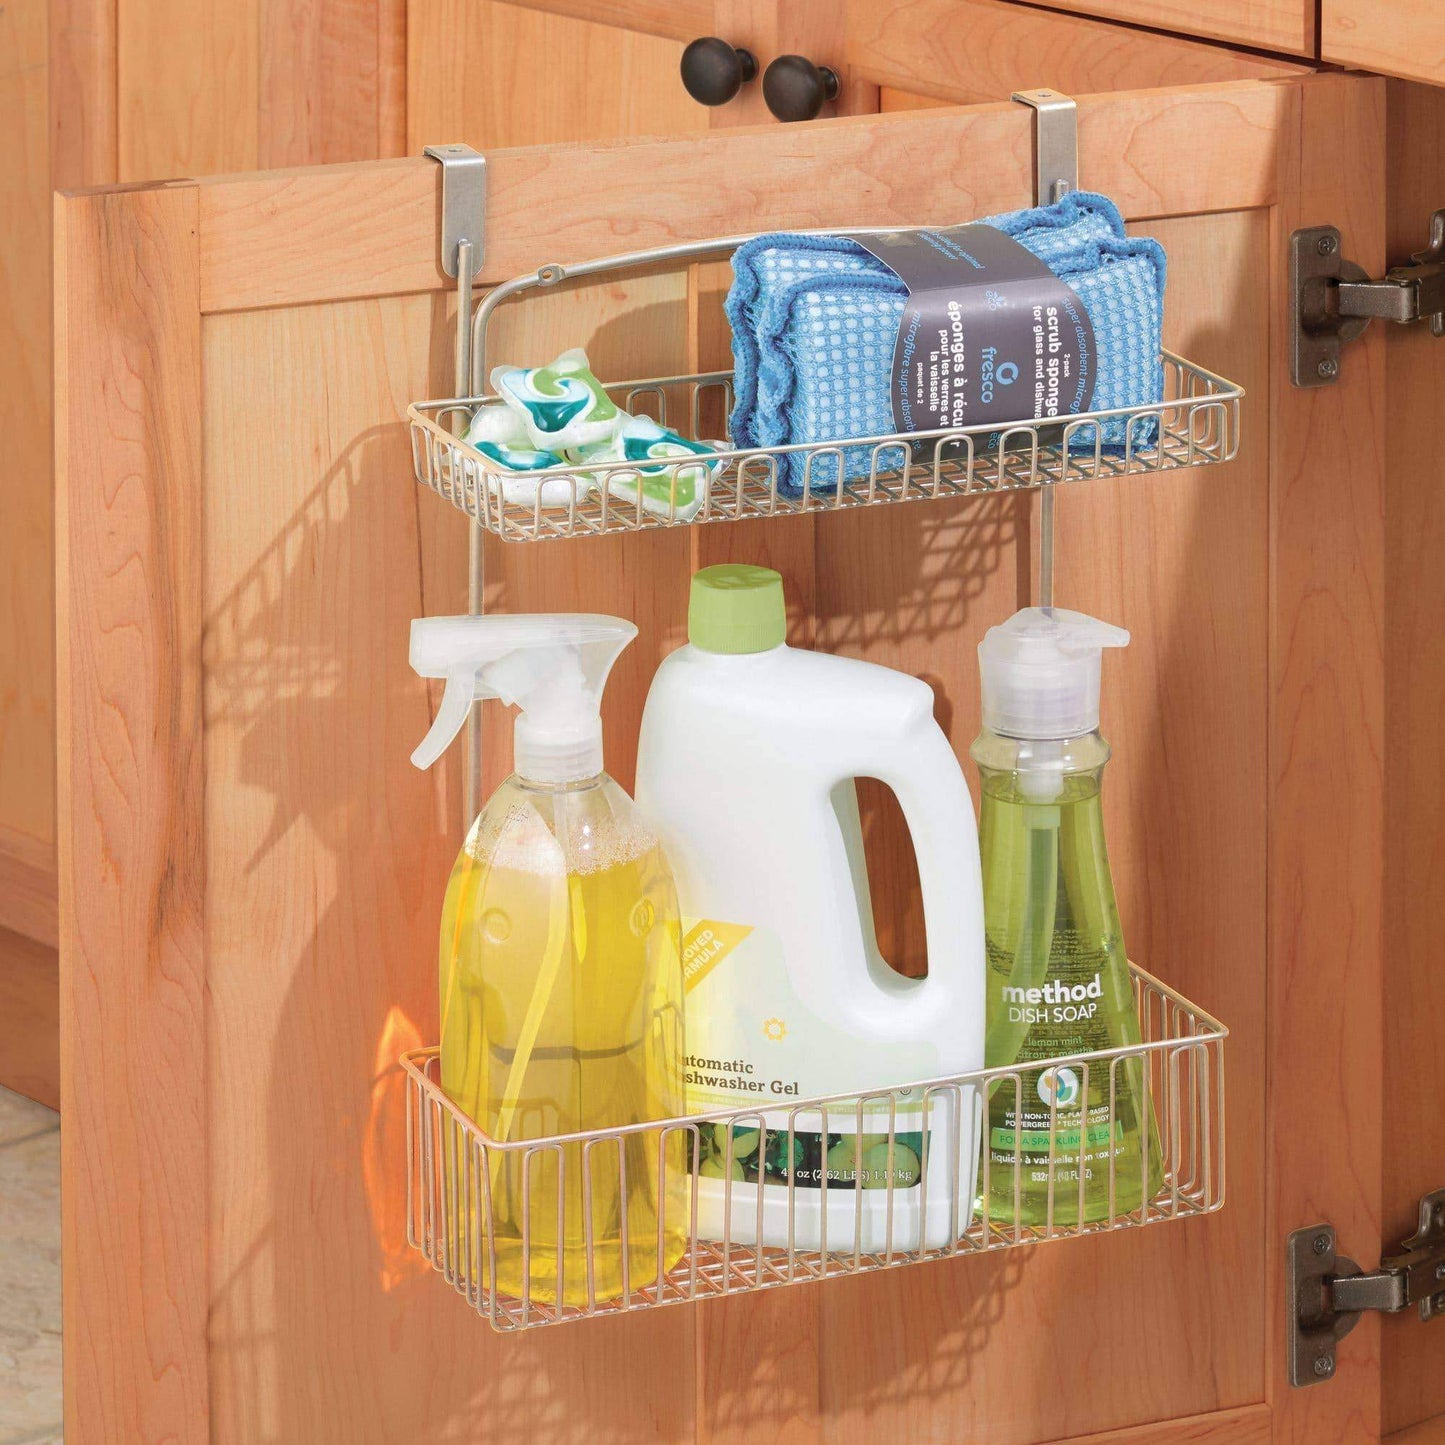 Organize with metal farmhouse over cabinet kitchen storage organizer holder or basket hang over cabinet doors in kitchen pantry holds dish soap window cleaner sponges satin